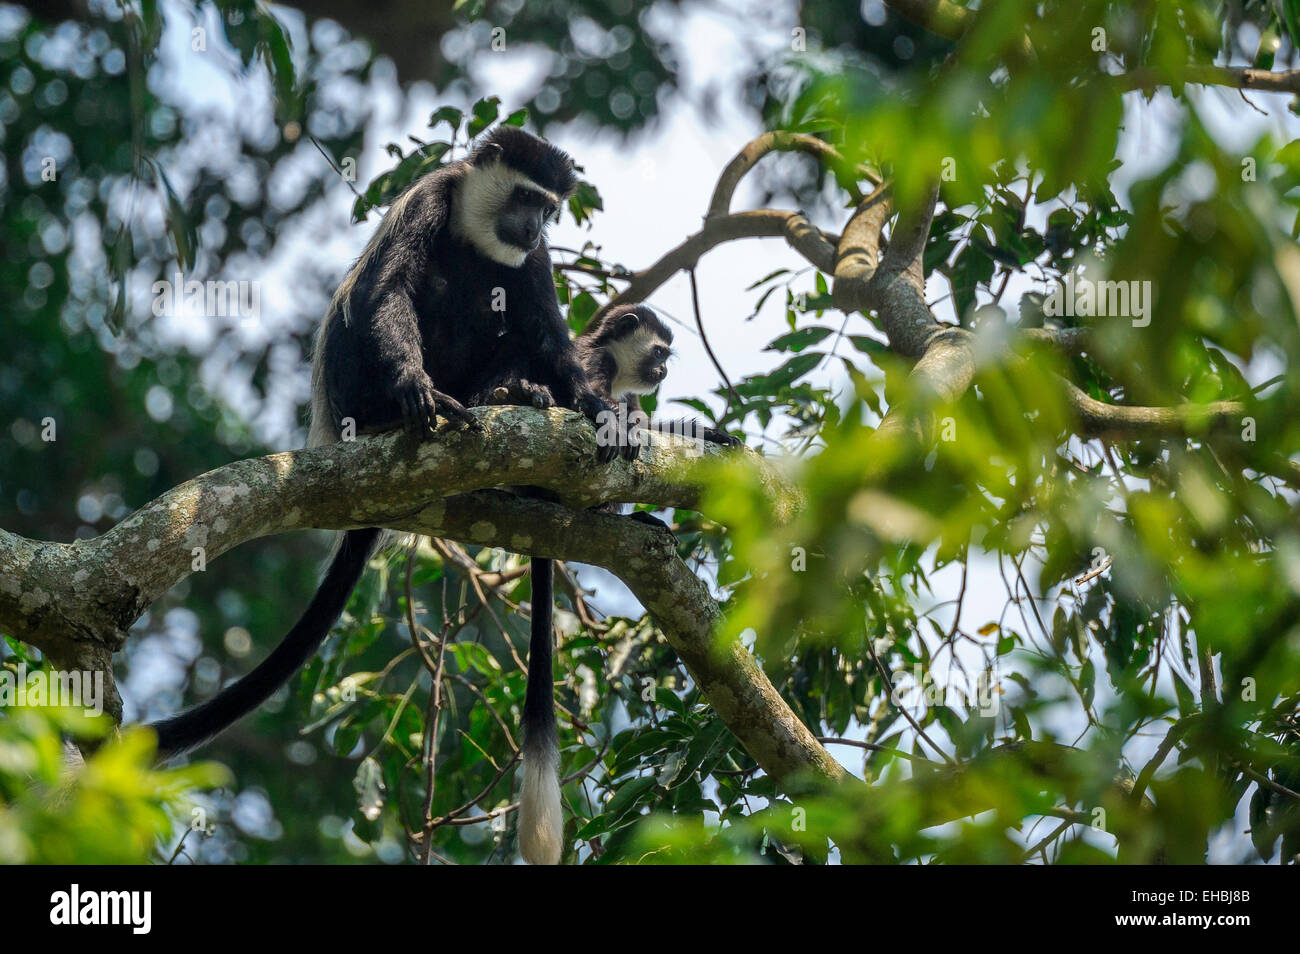 A black and white (Abyssinian) colobus monkey (mantled guereza) and her offspring up a tree. Stock Photo